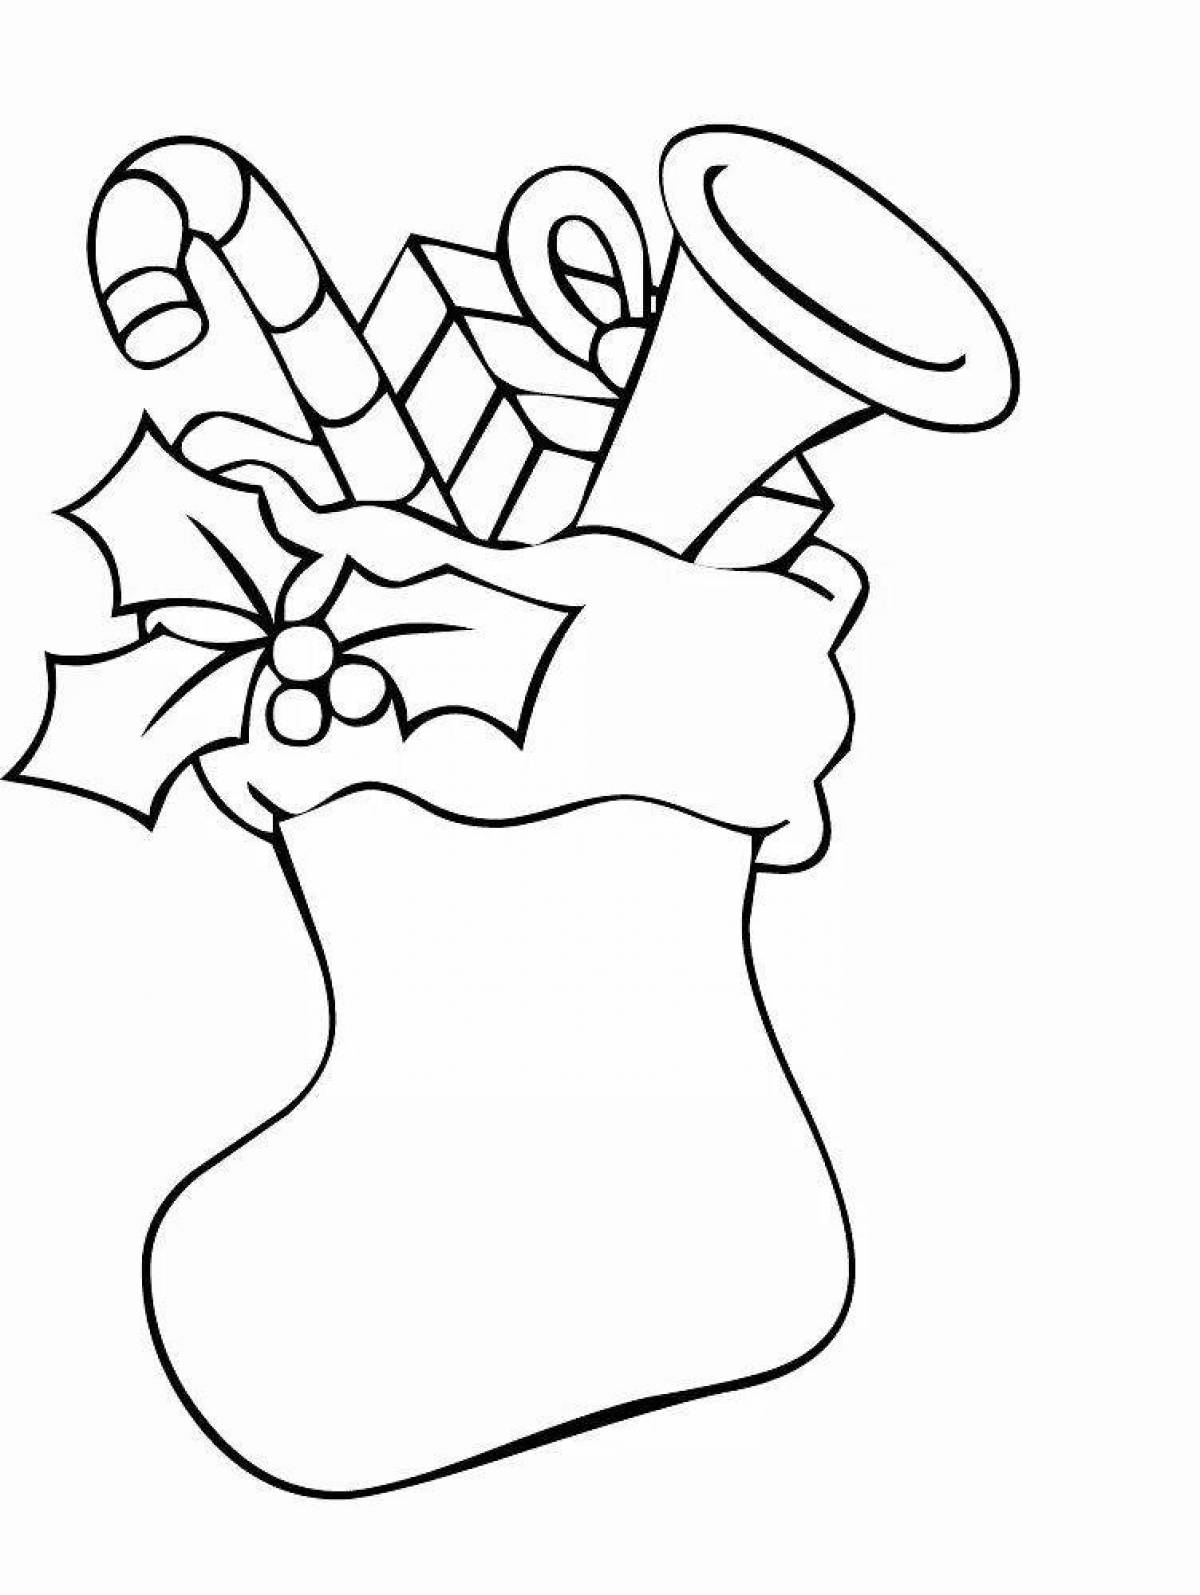 Gorgeous Christmas boot coloring page